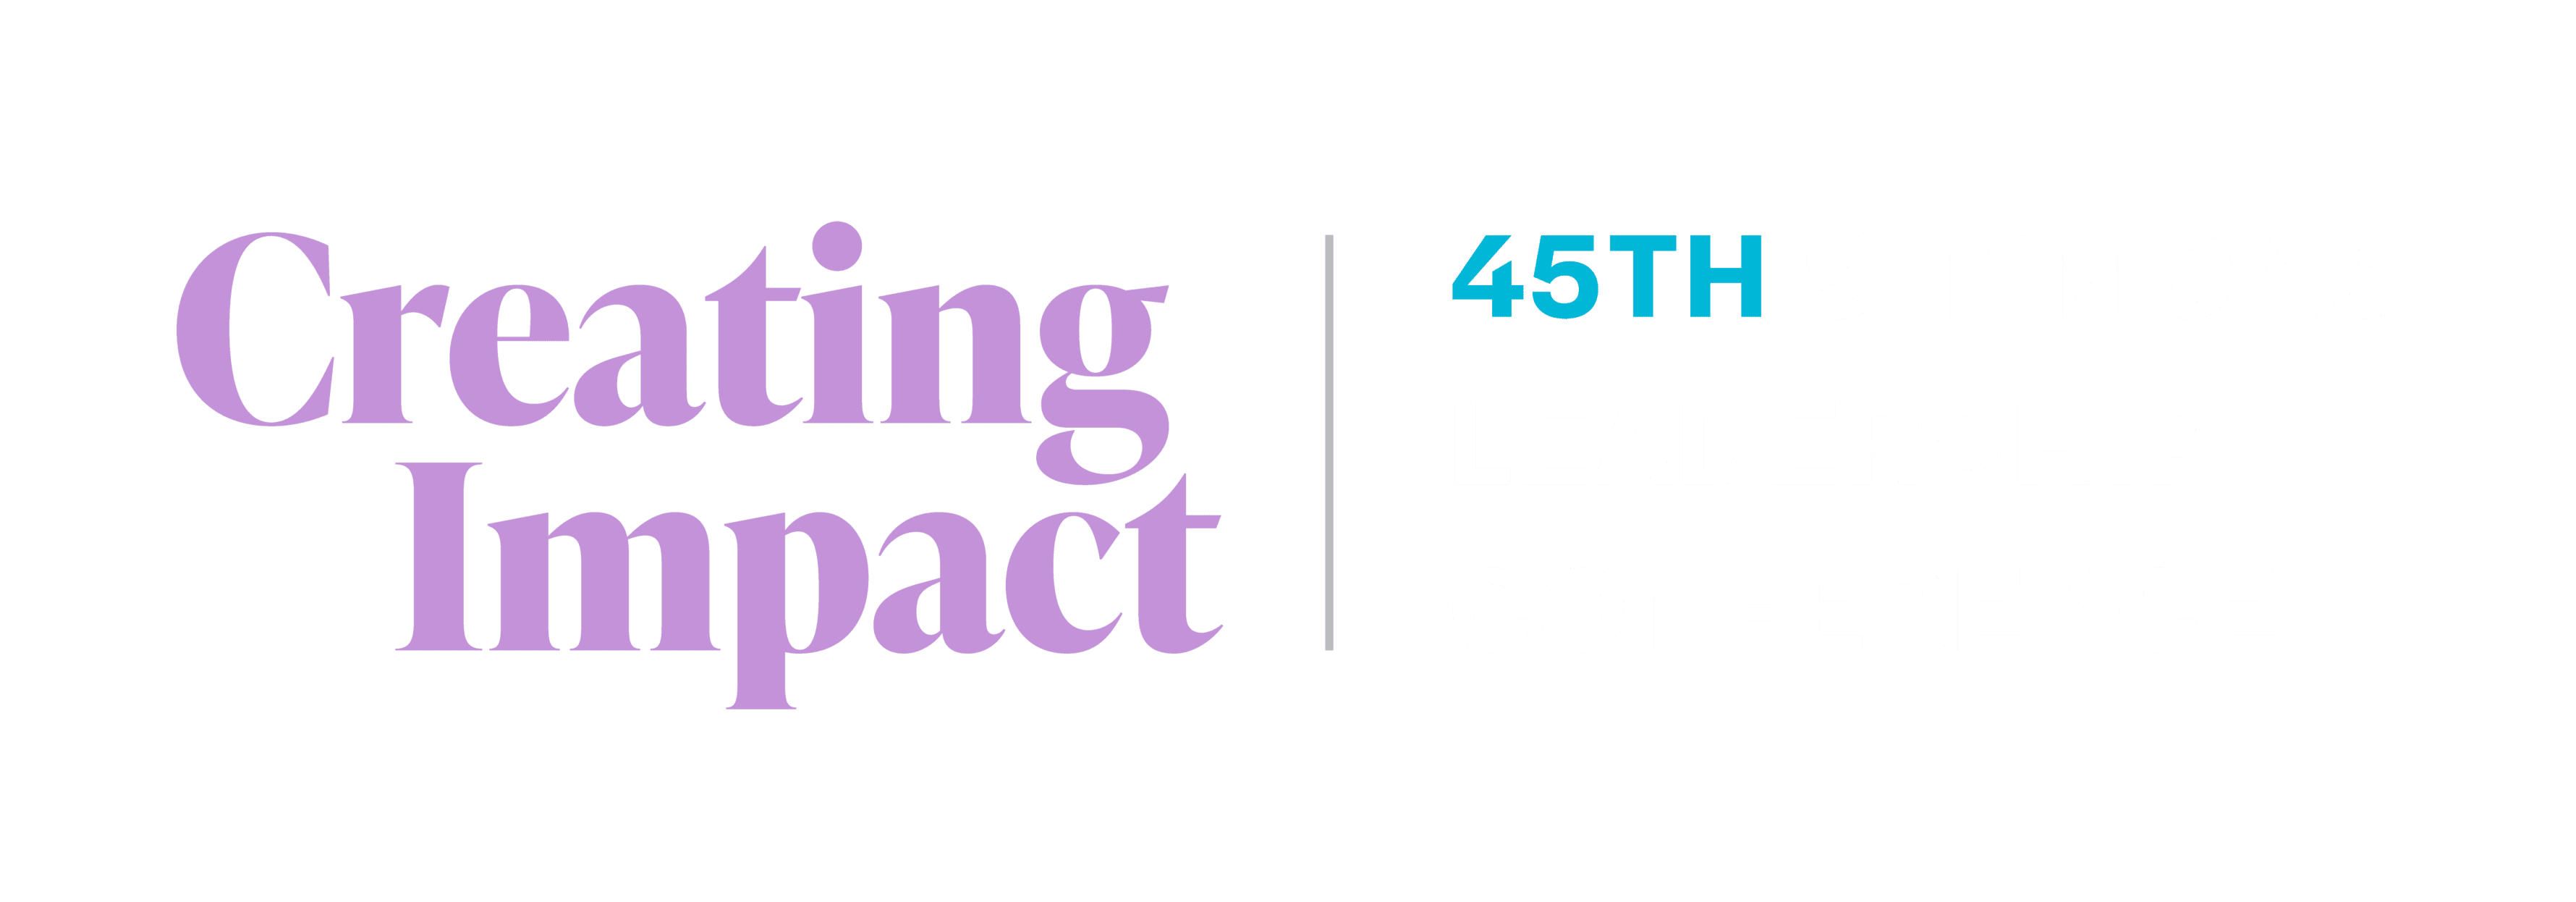 Creating Impact Conference logo